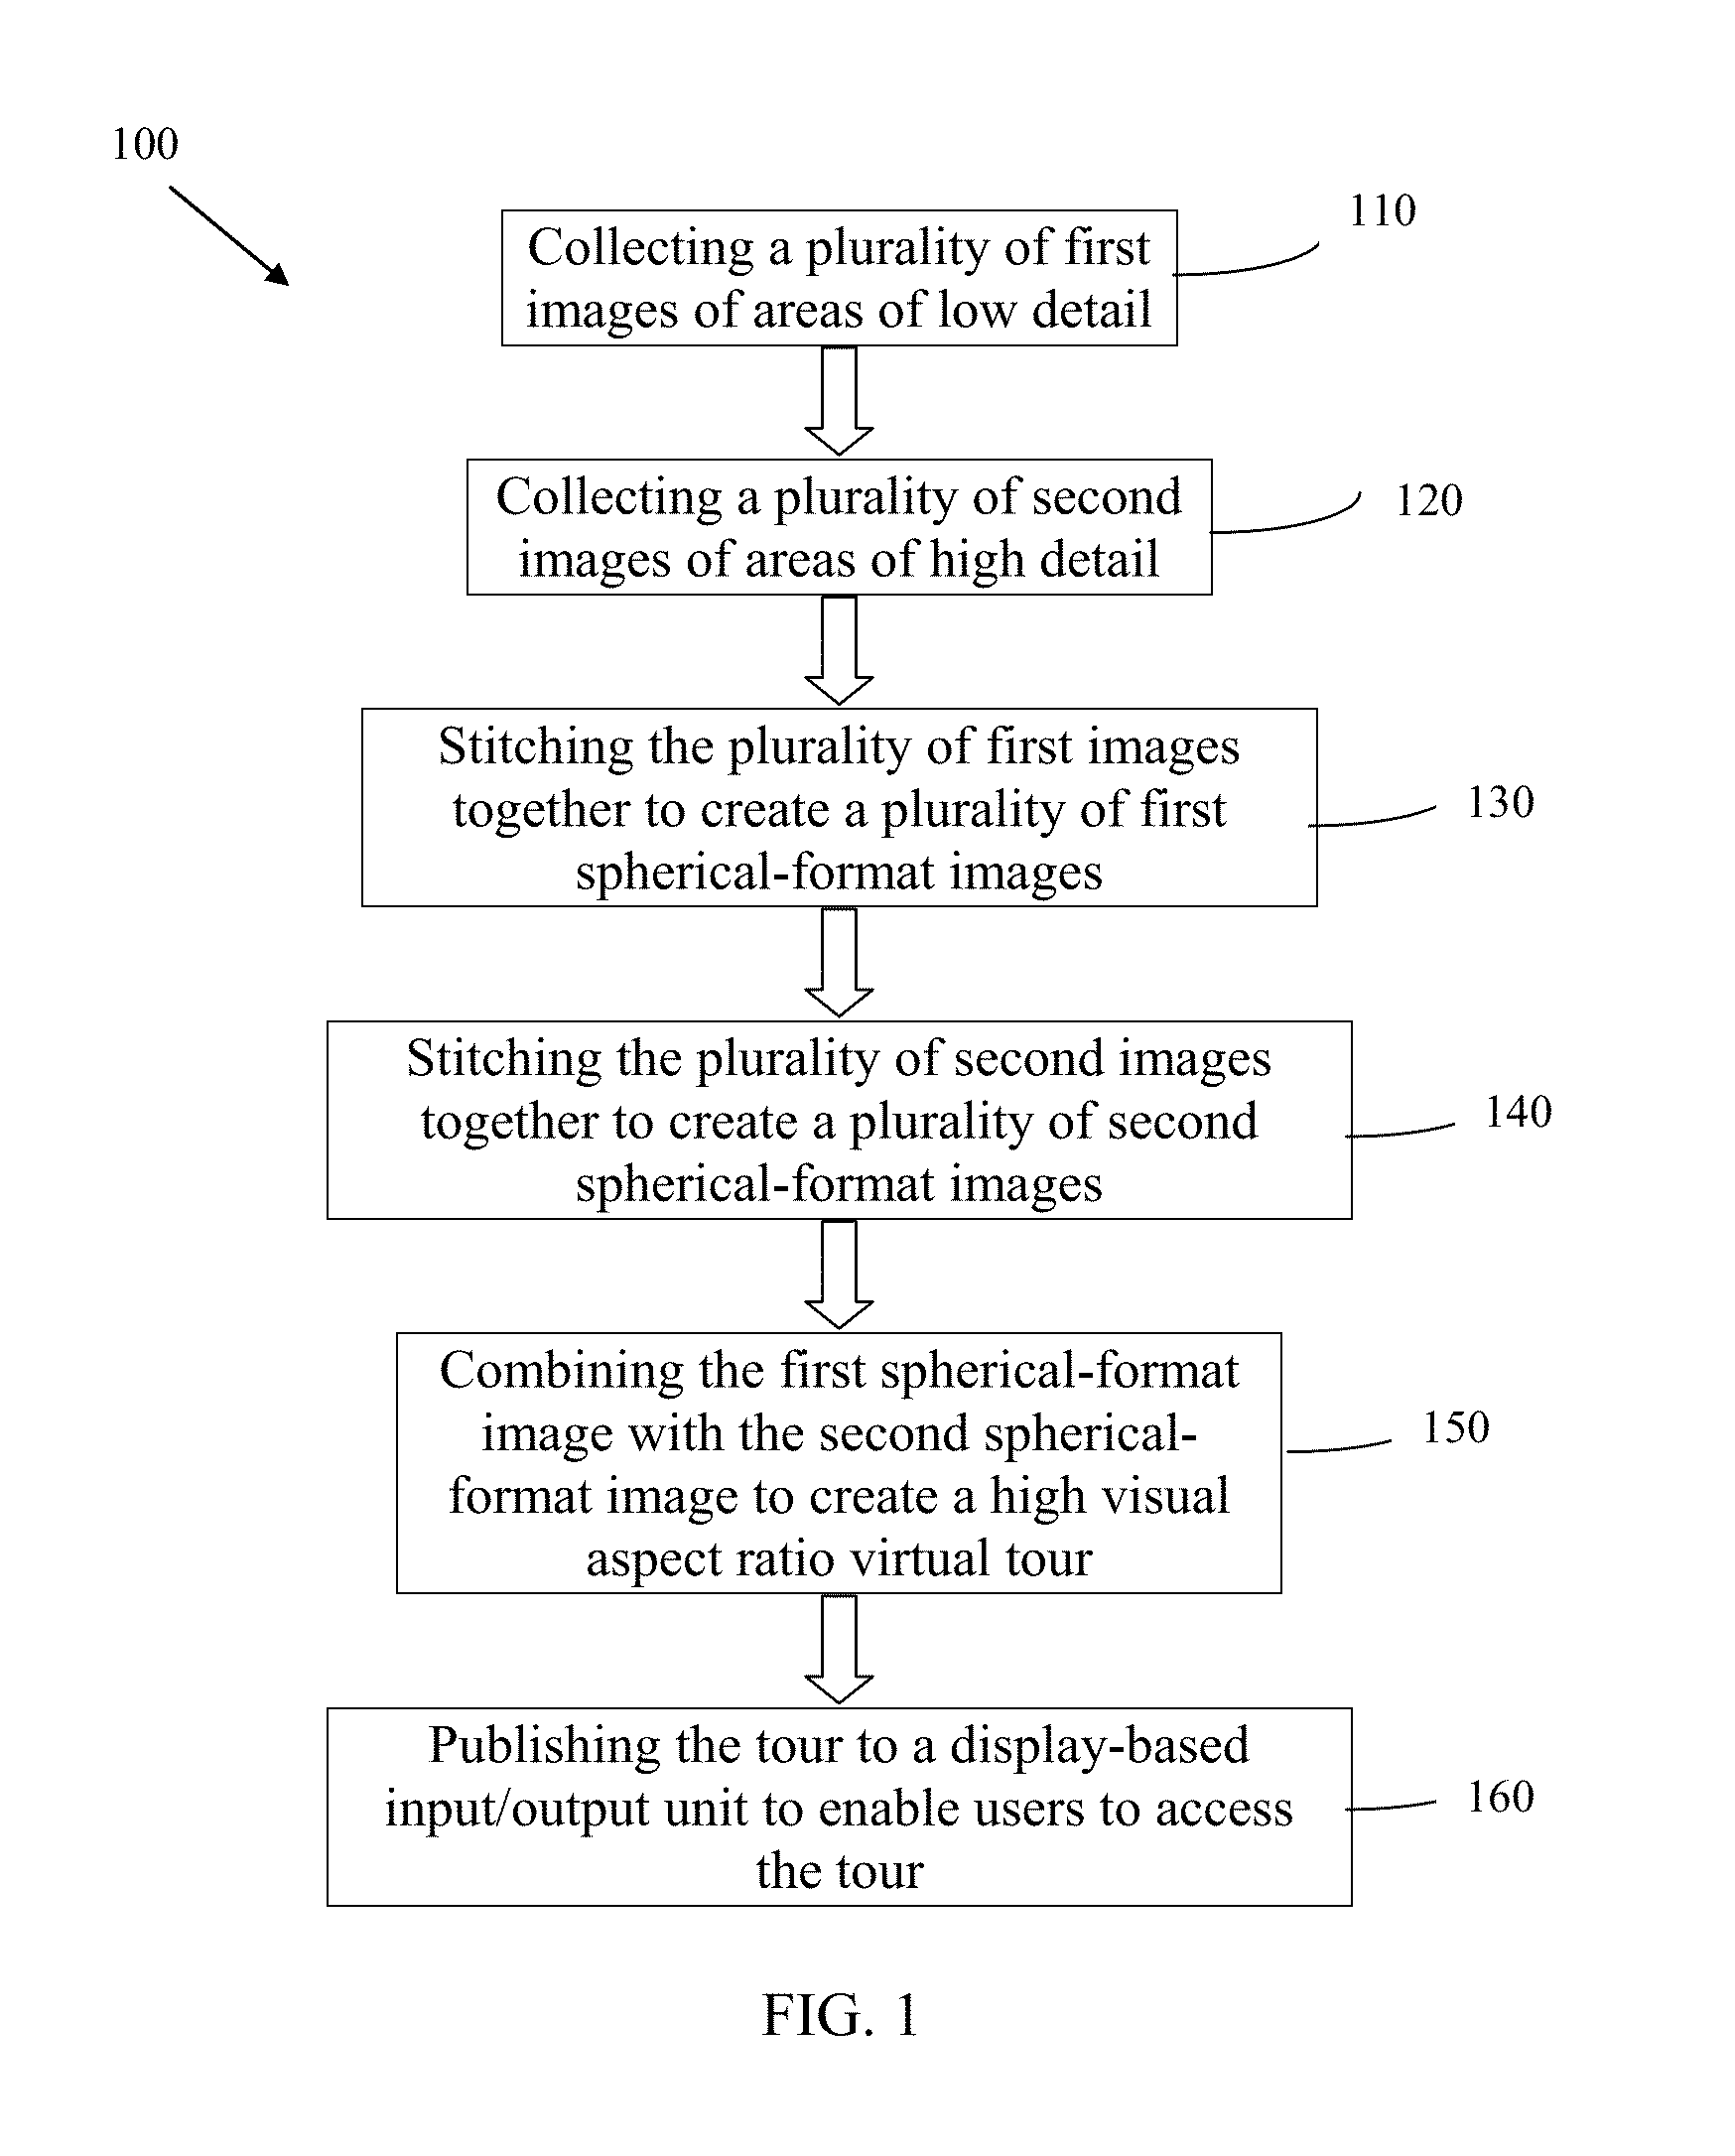 Systems and methods for creating and utilizing high visual aspect ratio virtual environments